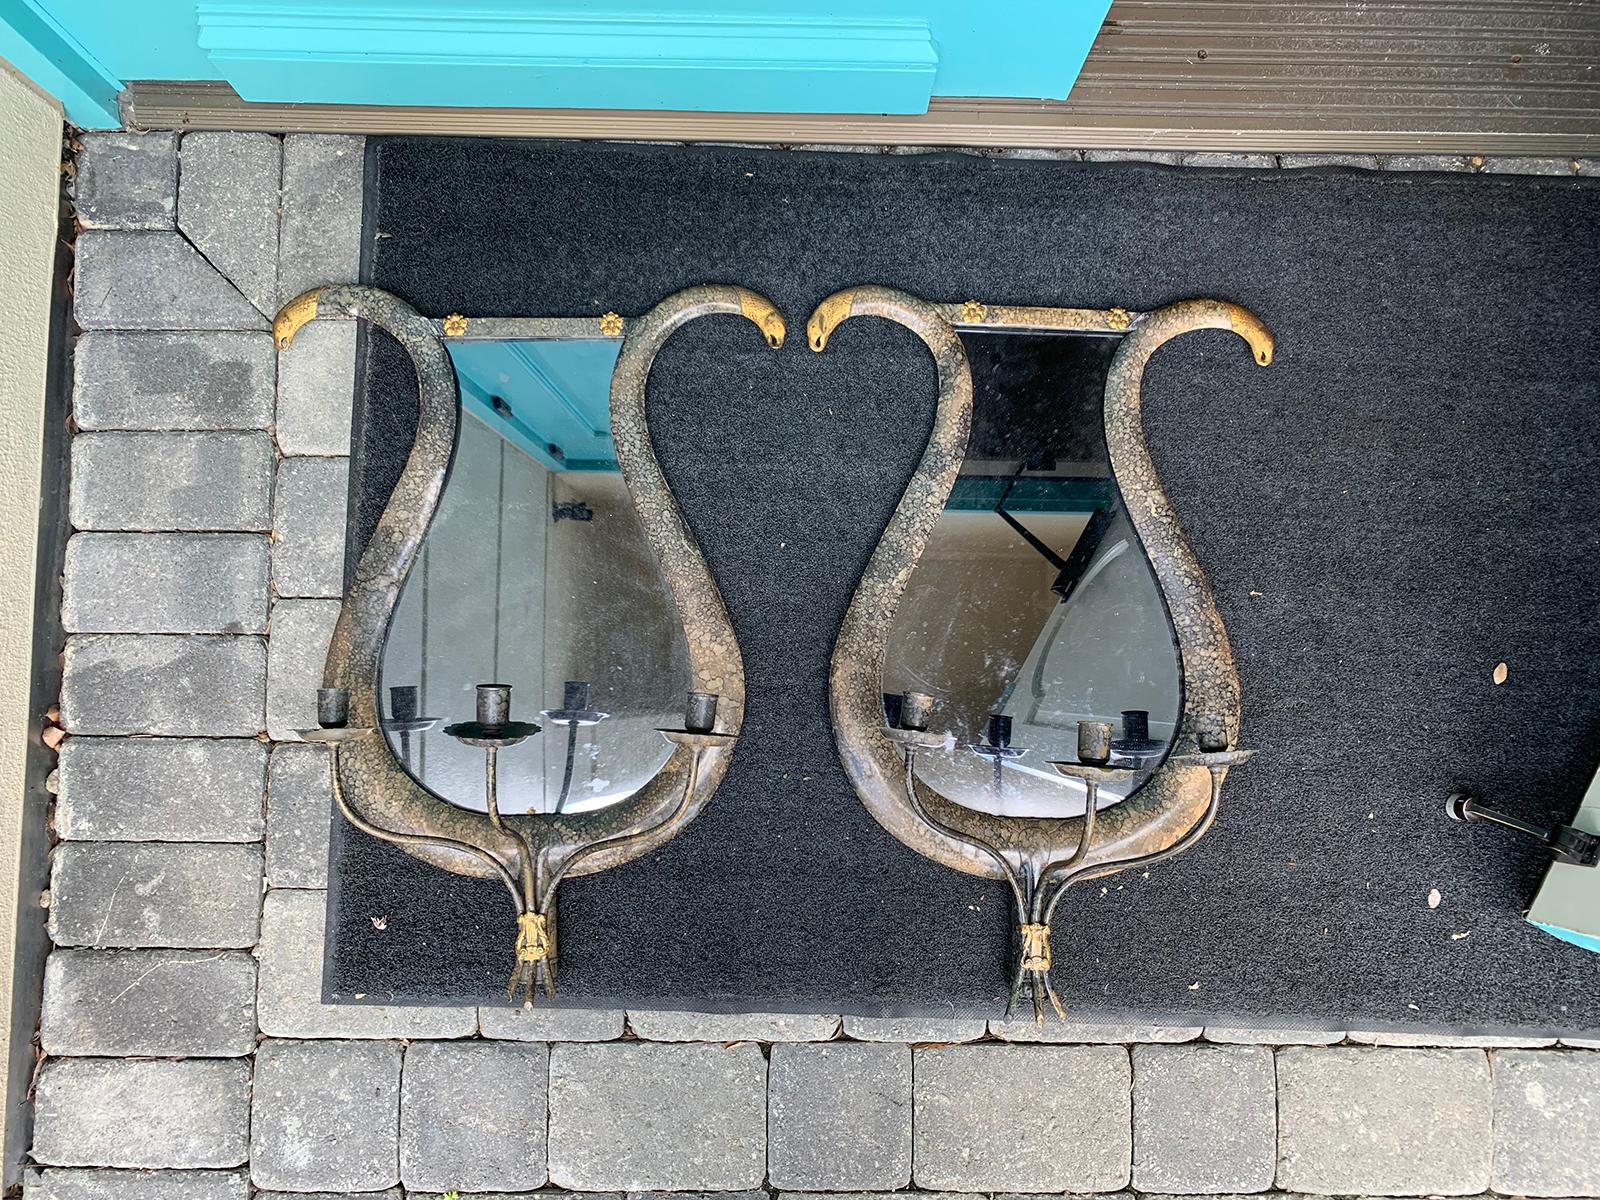 Pair of 20th Century Neoclassical Gilt/Polychrome Tole Lyre Form Mirrored Sconces Three-Arm Sconces with Snake Heads
*These are not wired/electrified